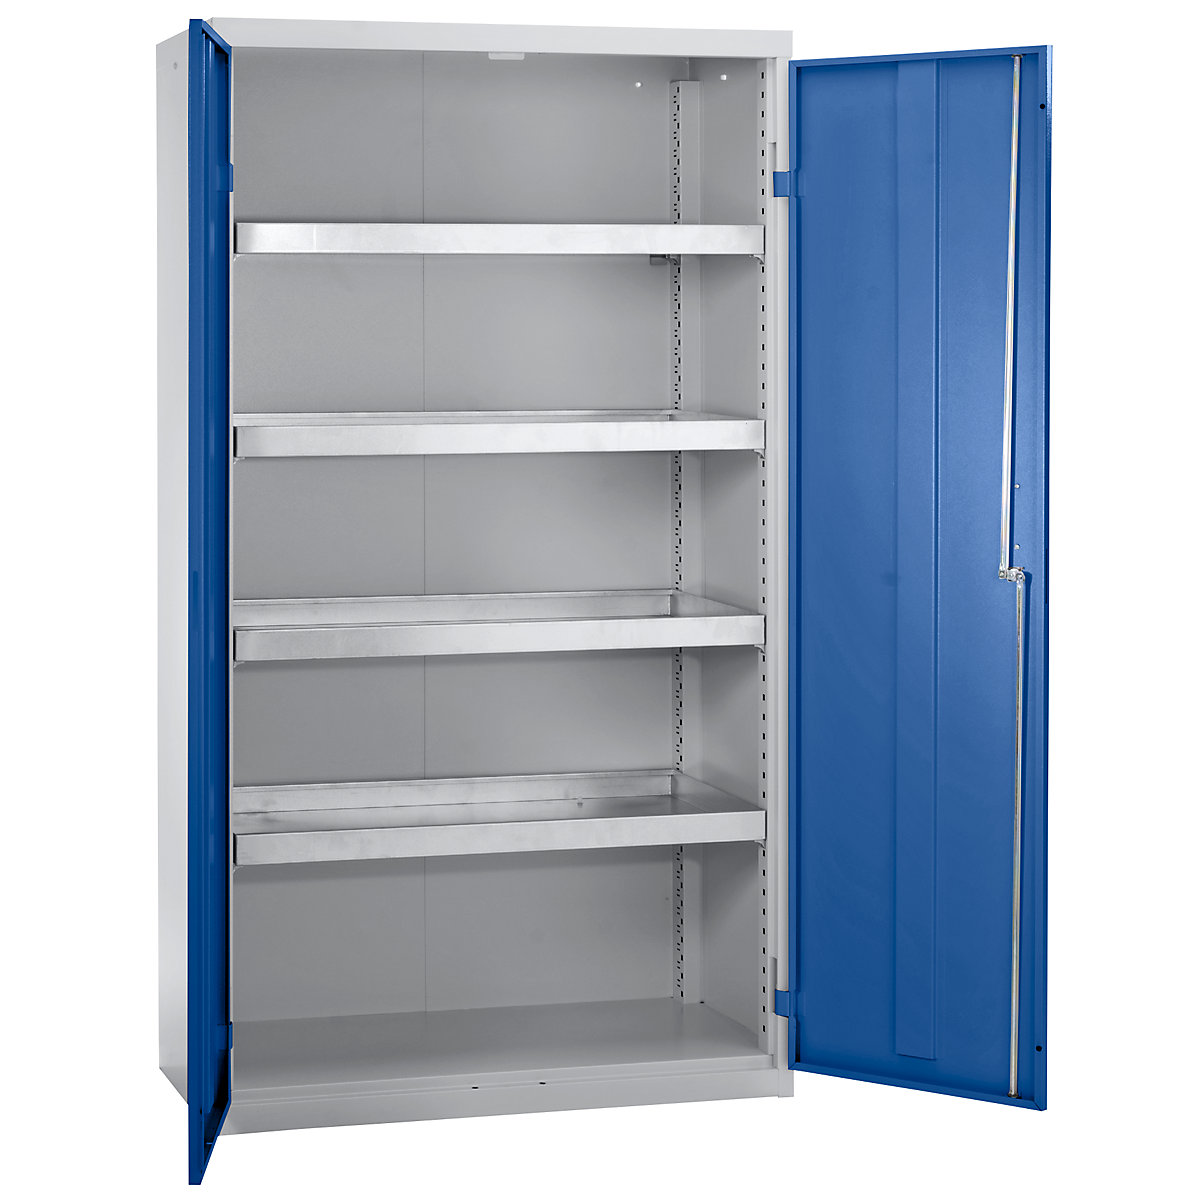 Environmental cupboard without door perforations, HxWxD 1800 x 1000 x 500 mm, 4 tray shelves, light grey / gentian blue-4